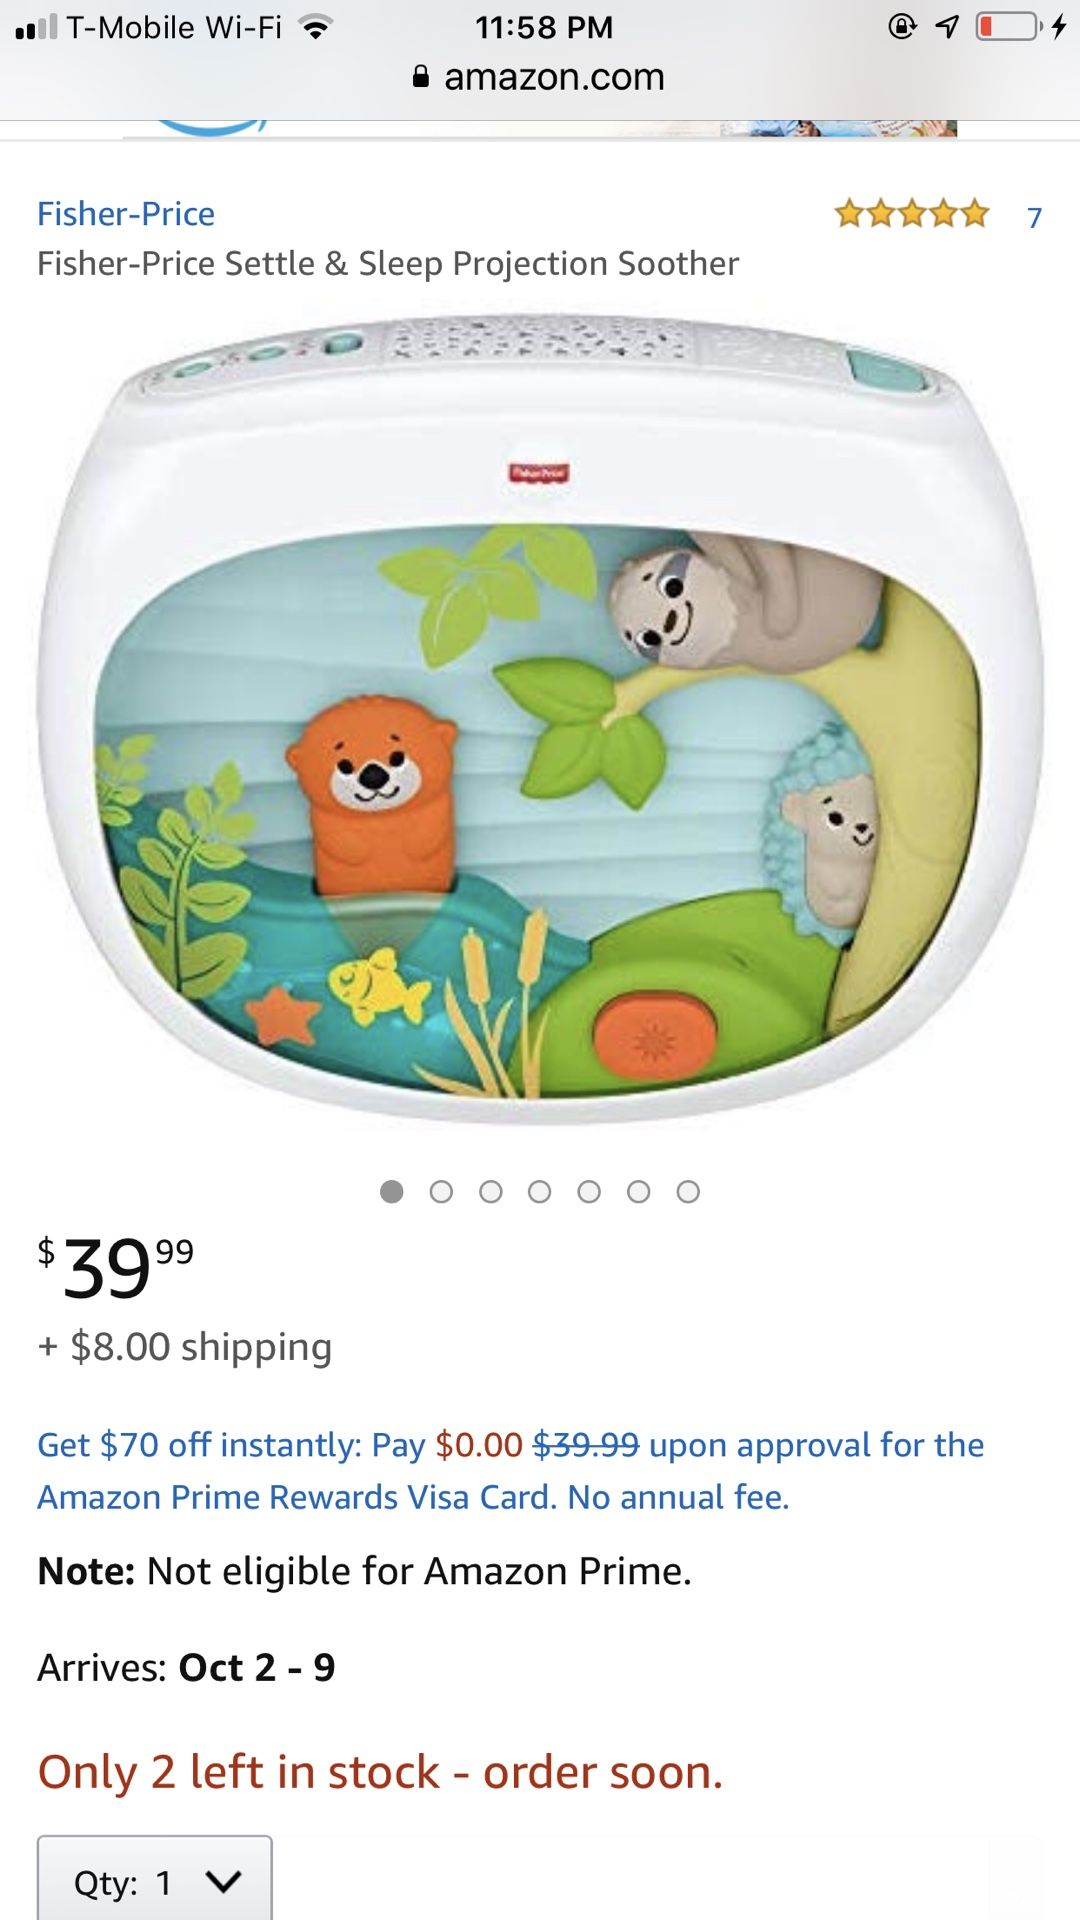 Brand new Fisher Price baby crib soother, sounds, star projector 3in1